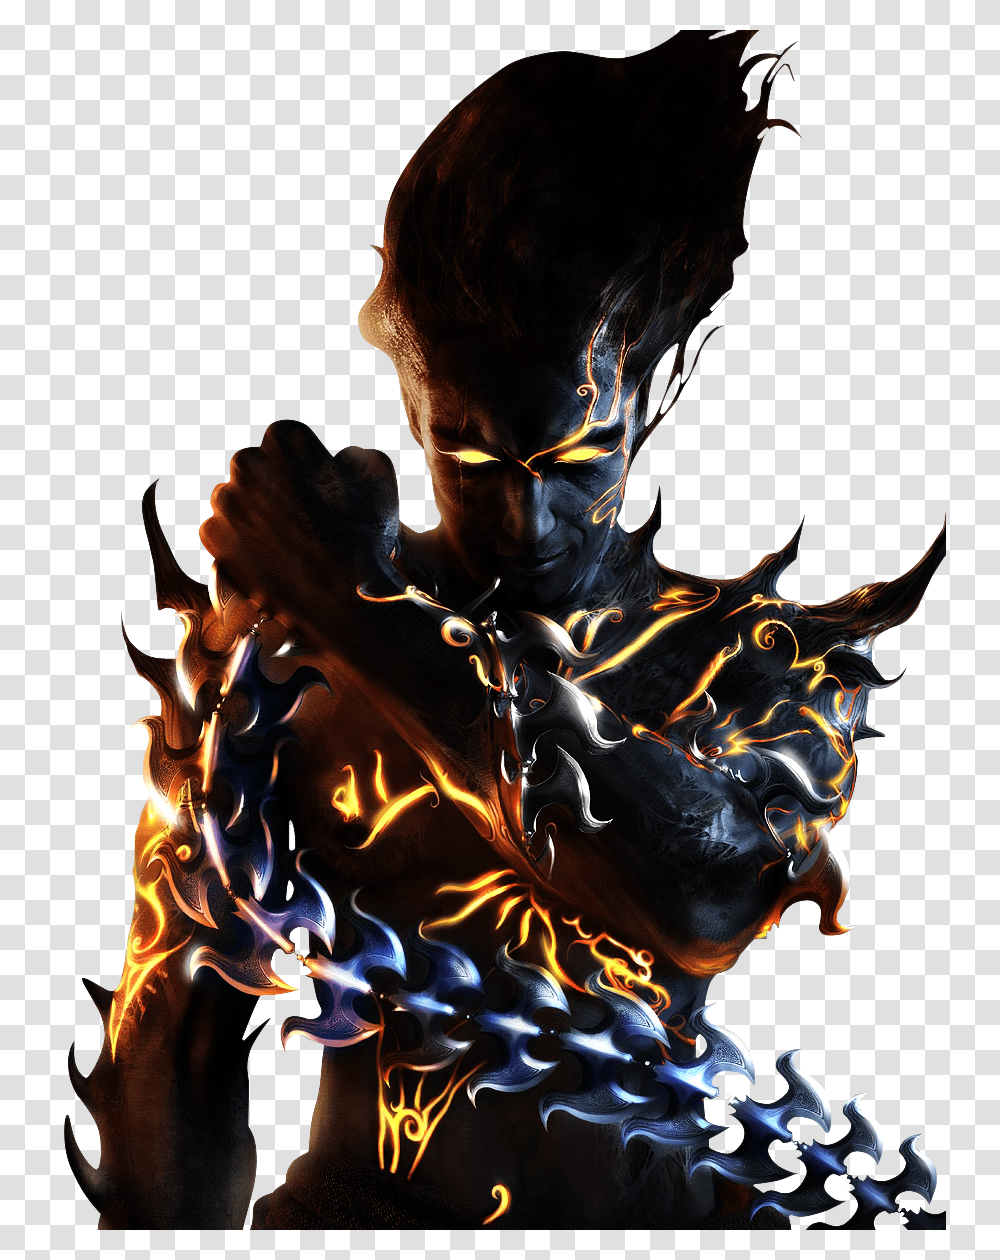 Dark Warrior Background Prince Of Persia The Two Thrones Dark Prince, Person, Human, Dragon, Flame Transparent Png